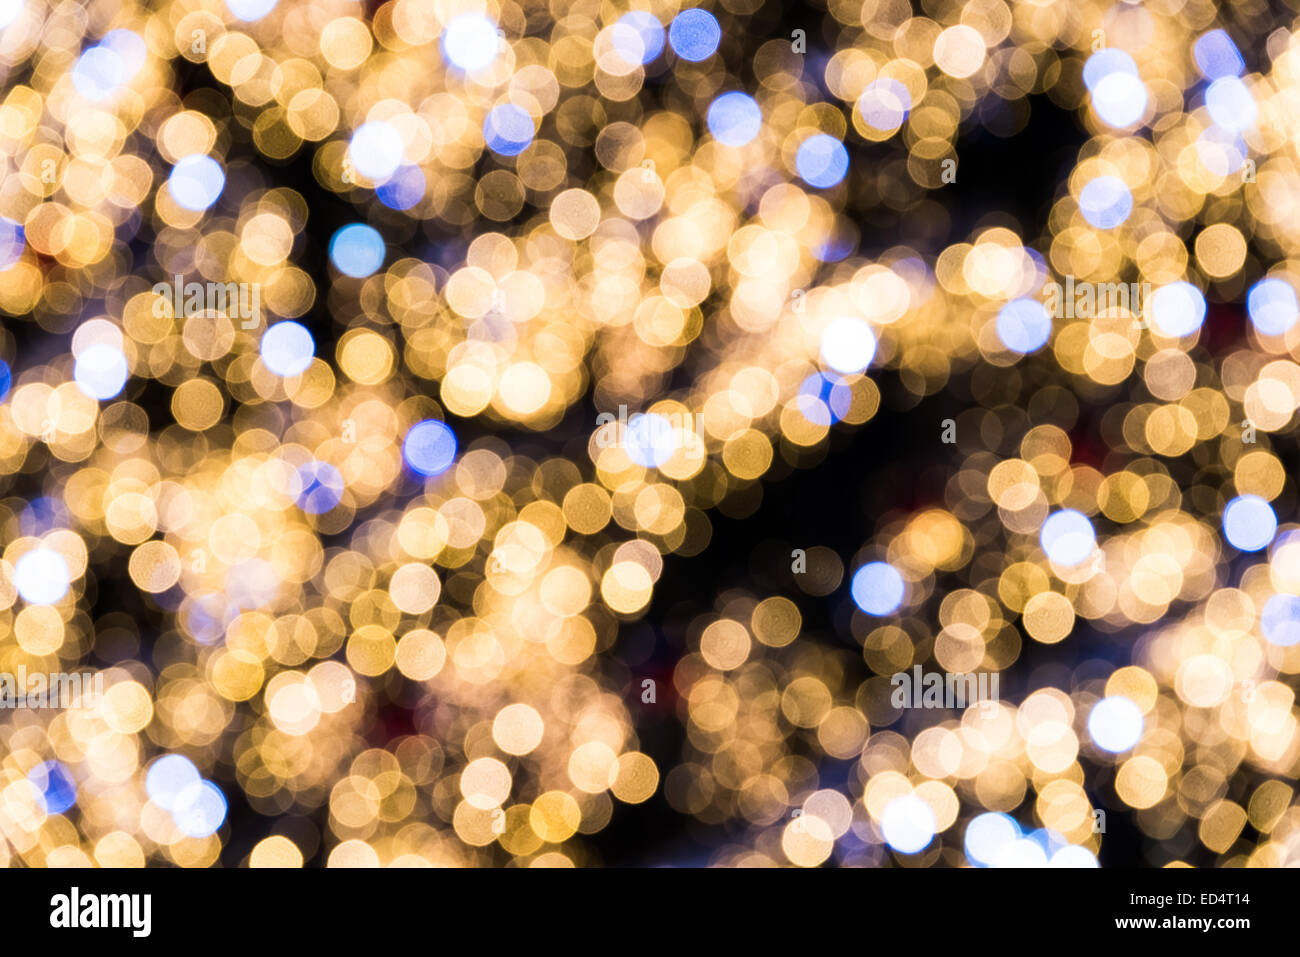 Abstract Vintage City Lights Bokeh Background Stock Photo